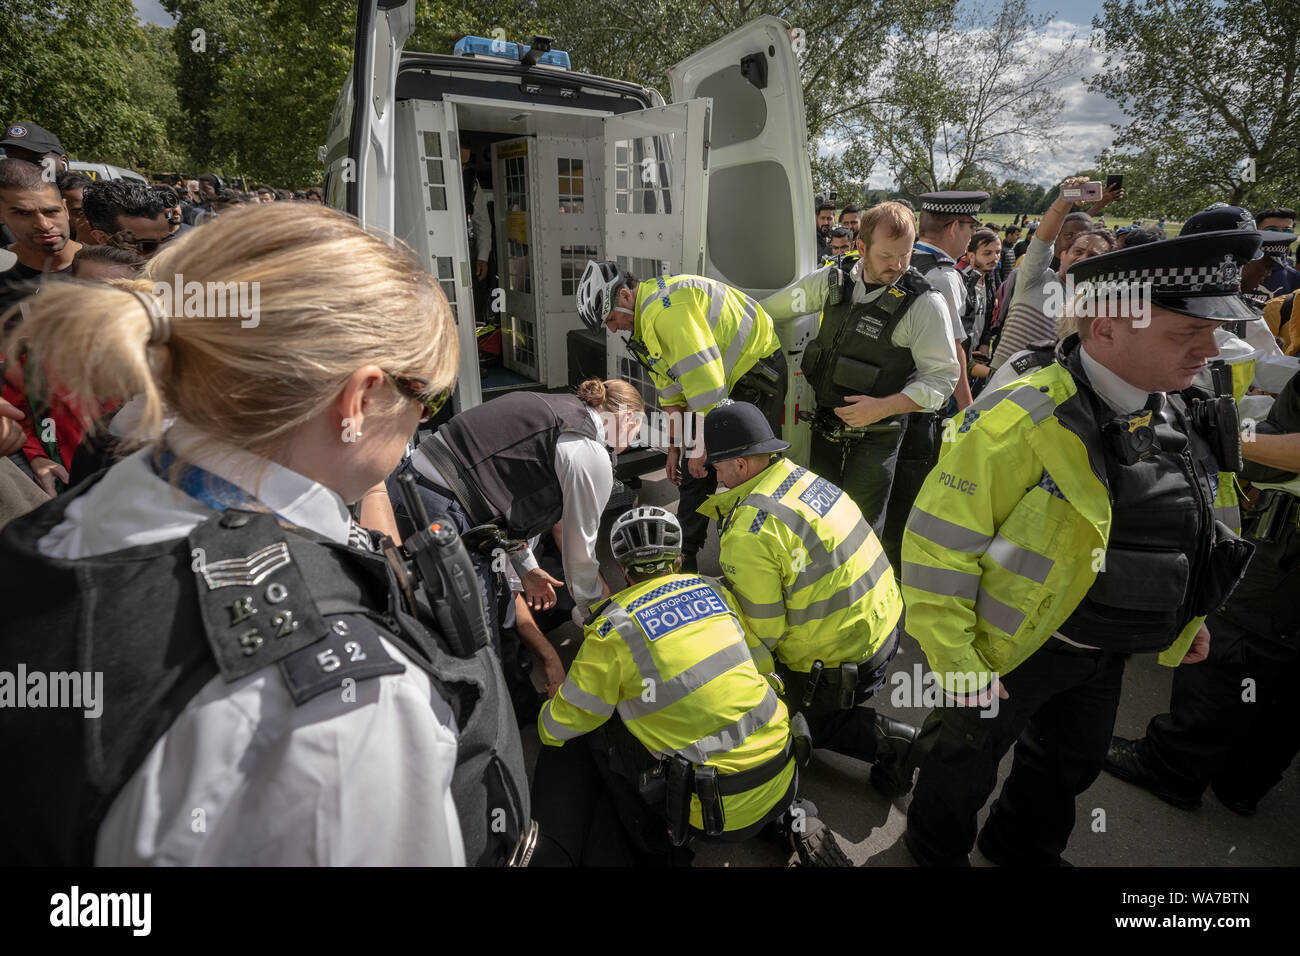 London, UK. 18th August, 2019. Police arrest a woman at Speakers’ Corner in Hyde Park after she became aggressive and attacked a police officer who requested she leave the park due to previous angry disputes and physical altercations. Credit: Guy Corbishley/Alamy Live News Stock Photo